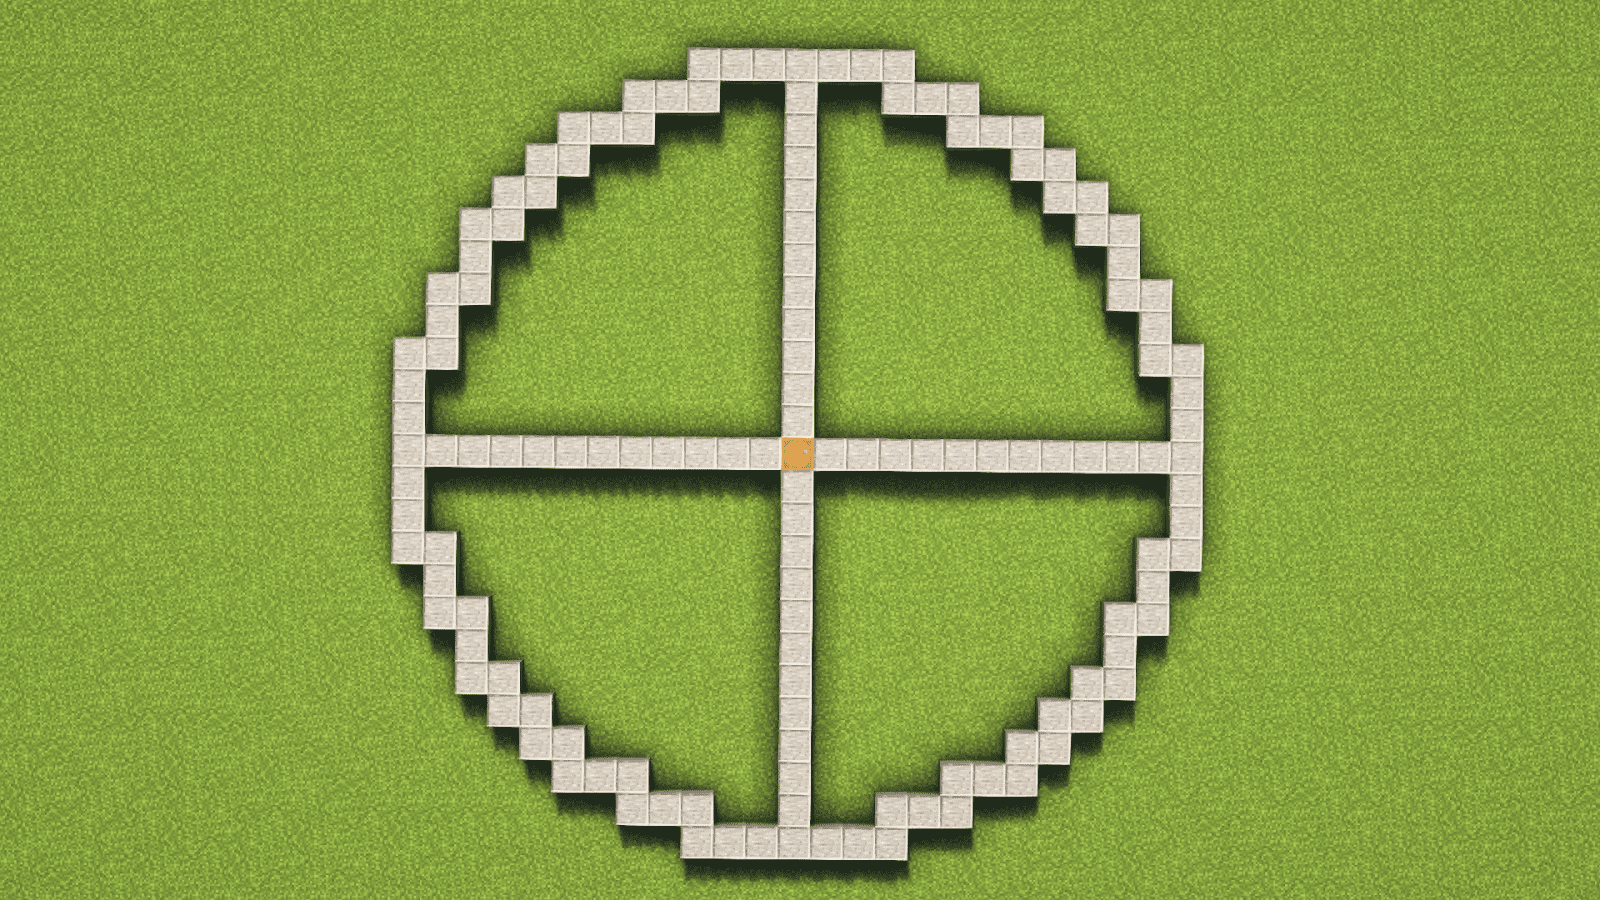 How to Make a Circle in Minecraft